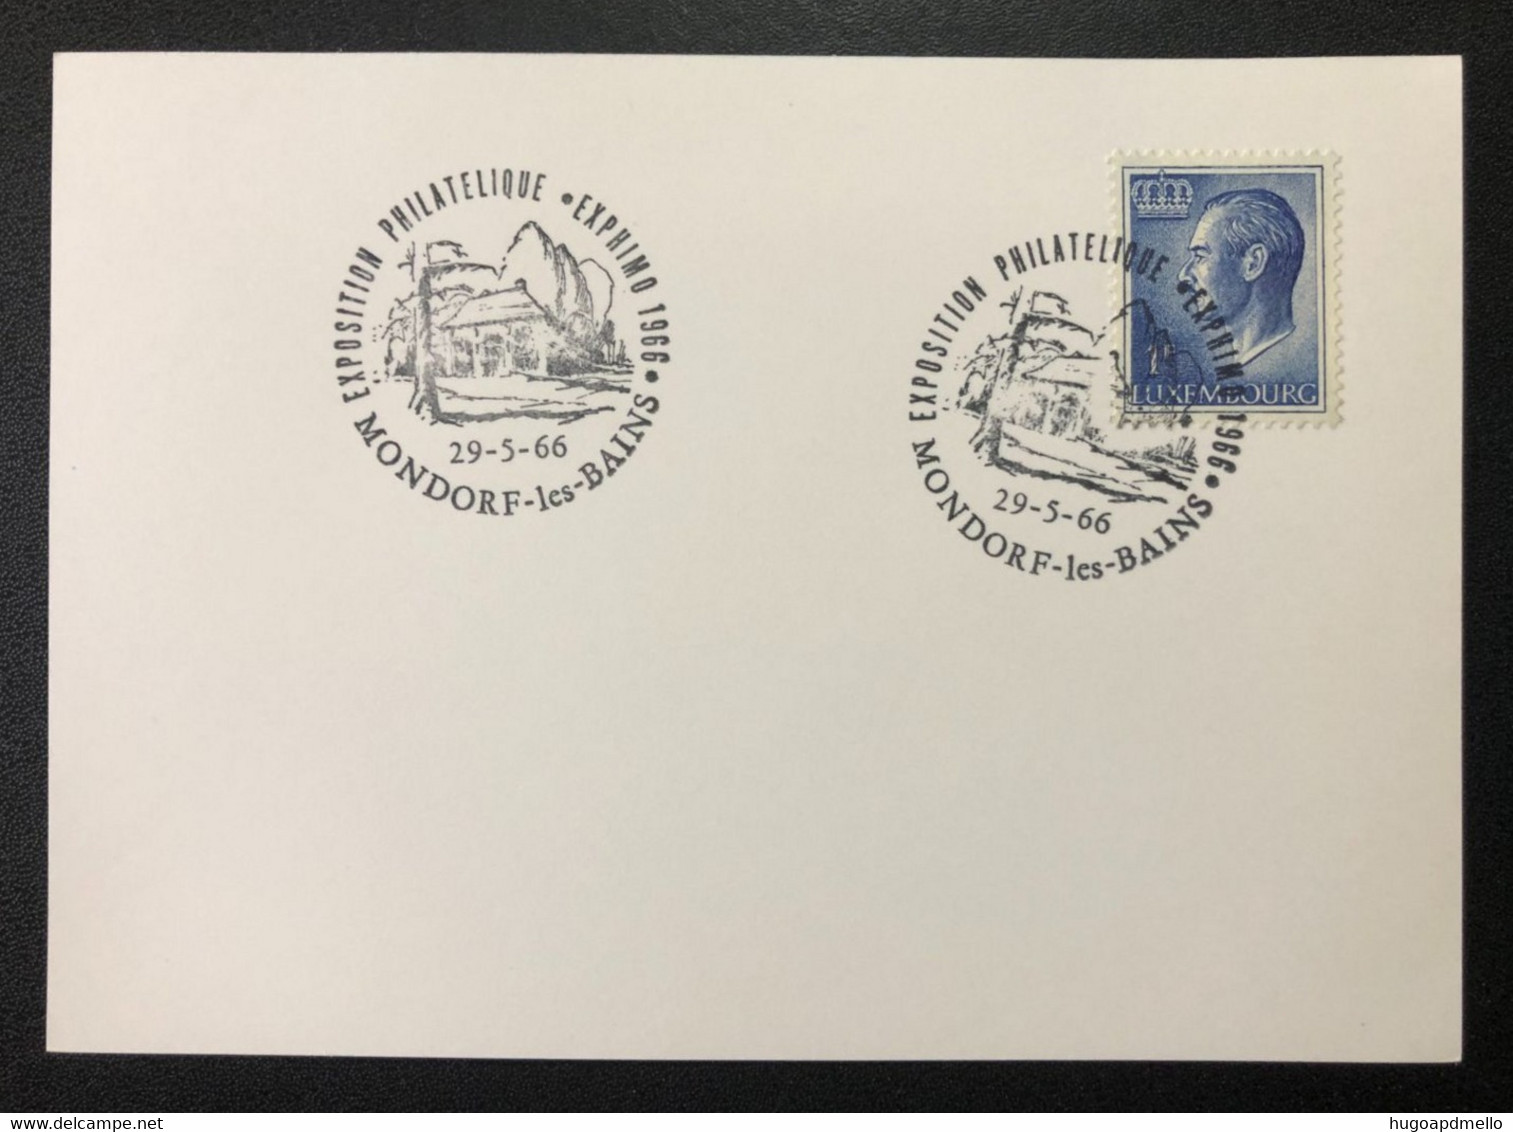 LUXEMBOURG, « MONDORF LES BAINS », « Exposition Philatélique - EXPHIMO 1966»,  With Special Postmark, 1966 - Covers & Documents